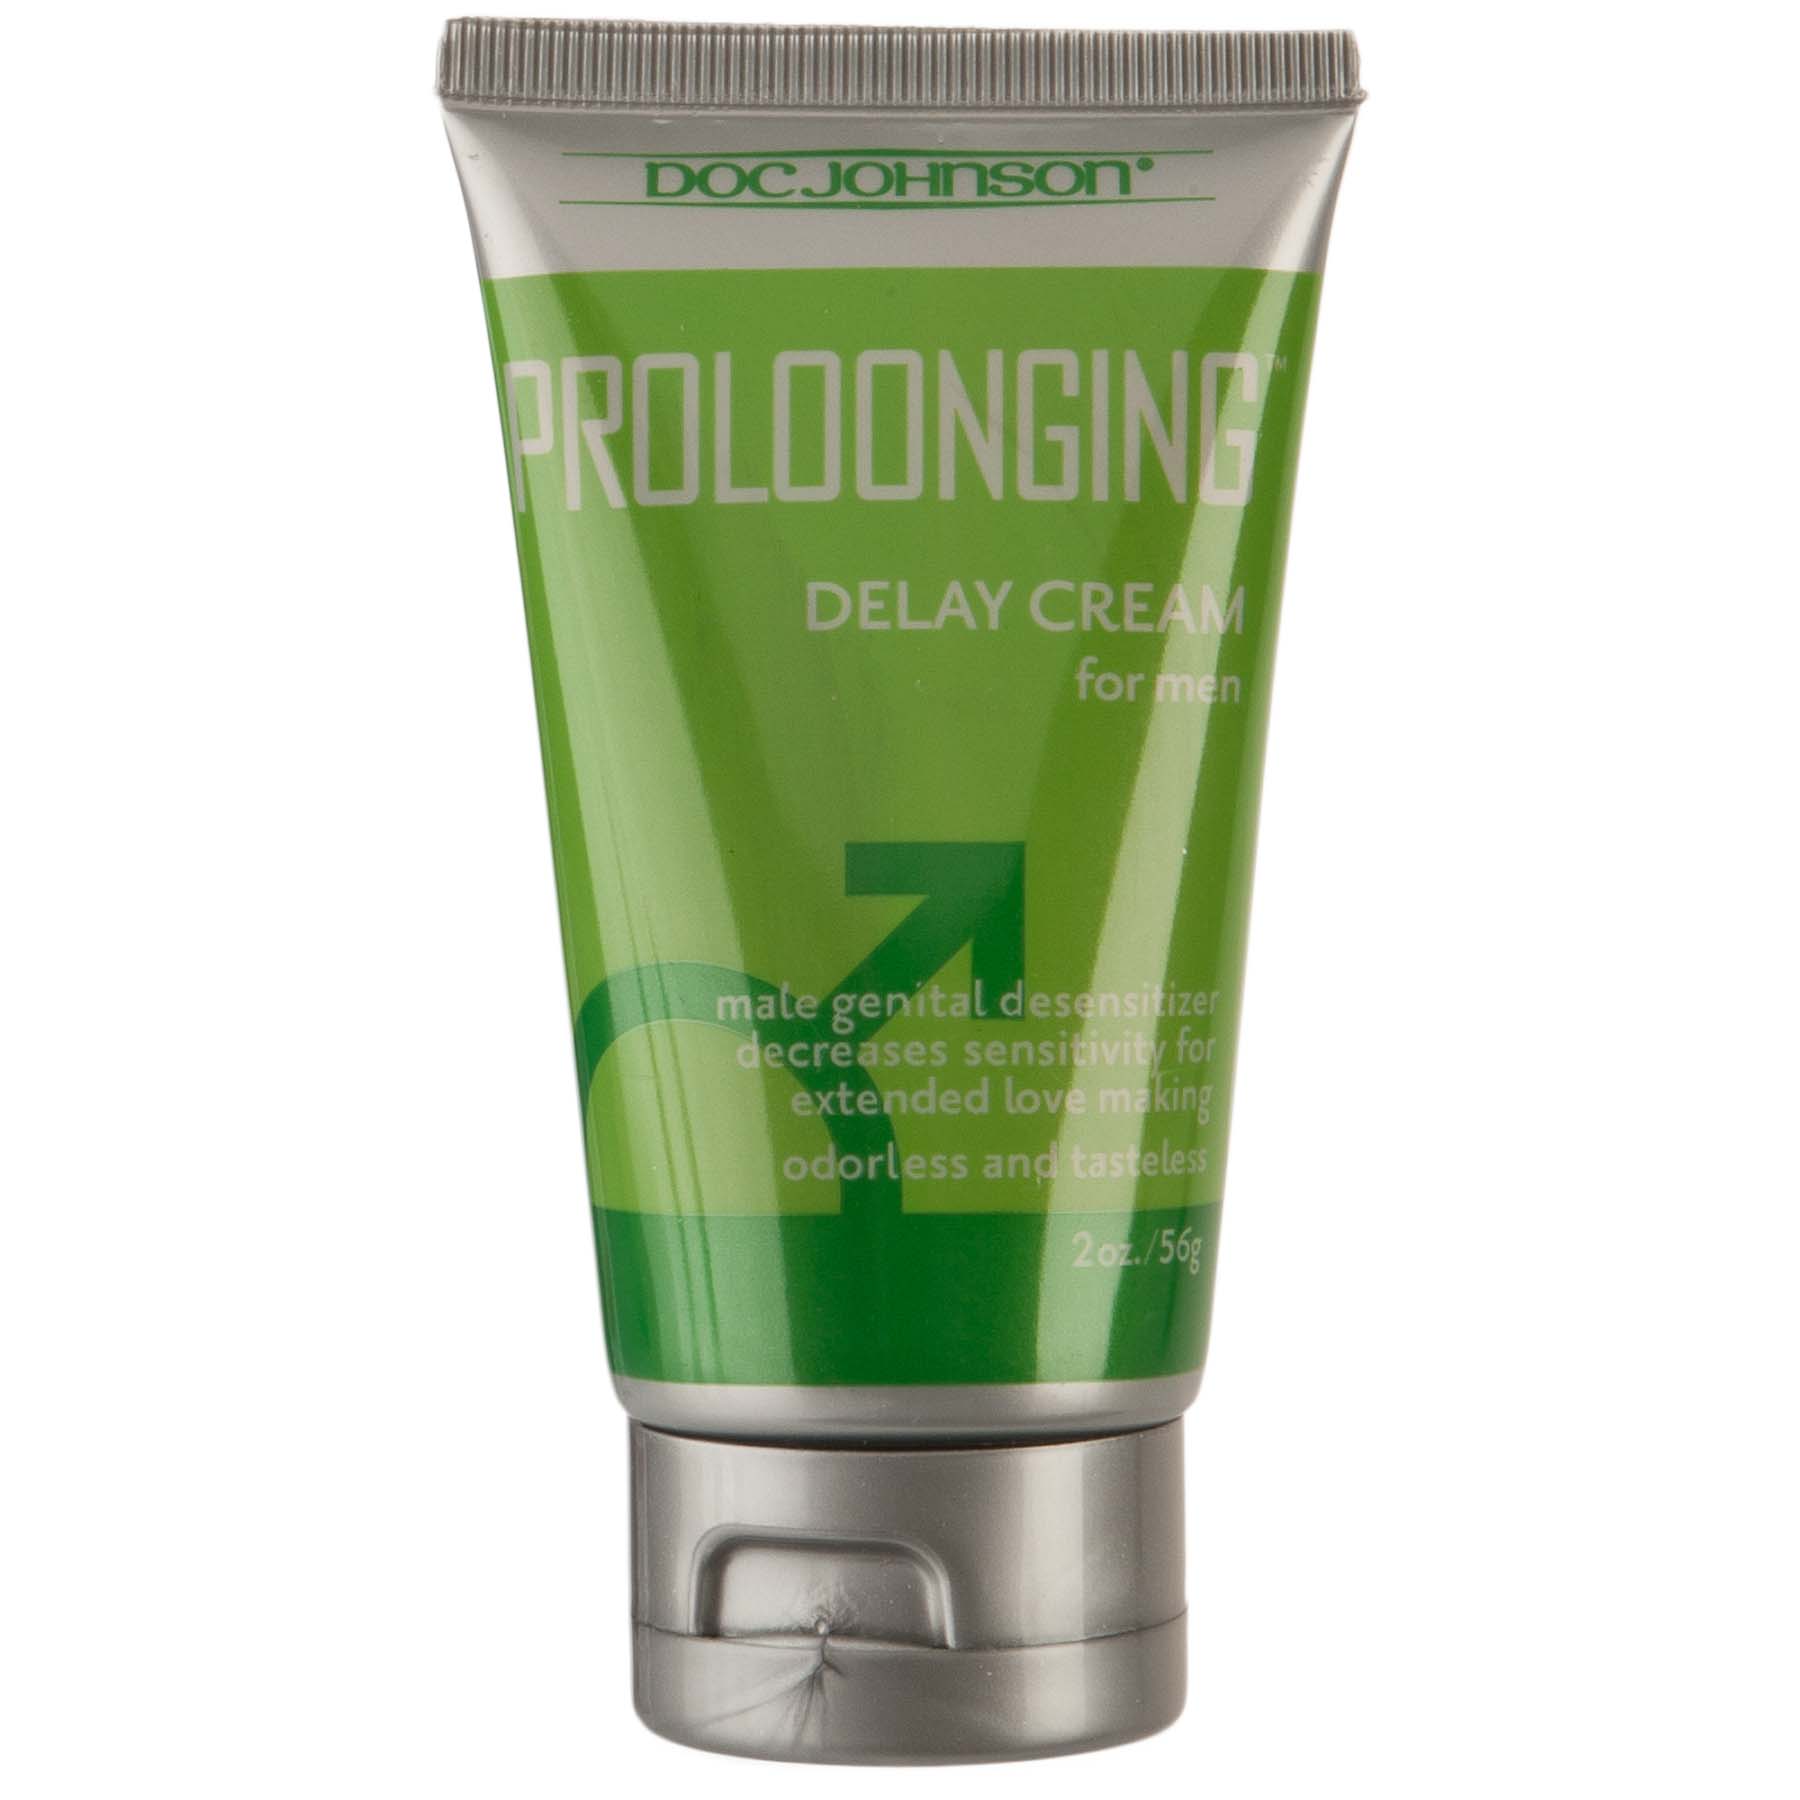 proloonging delay cream for men  oz boxed 